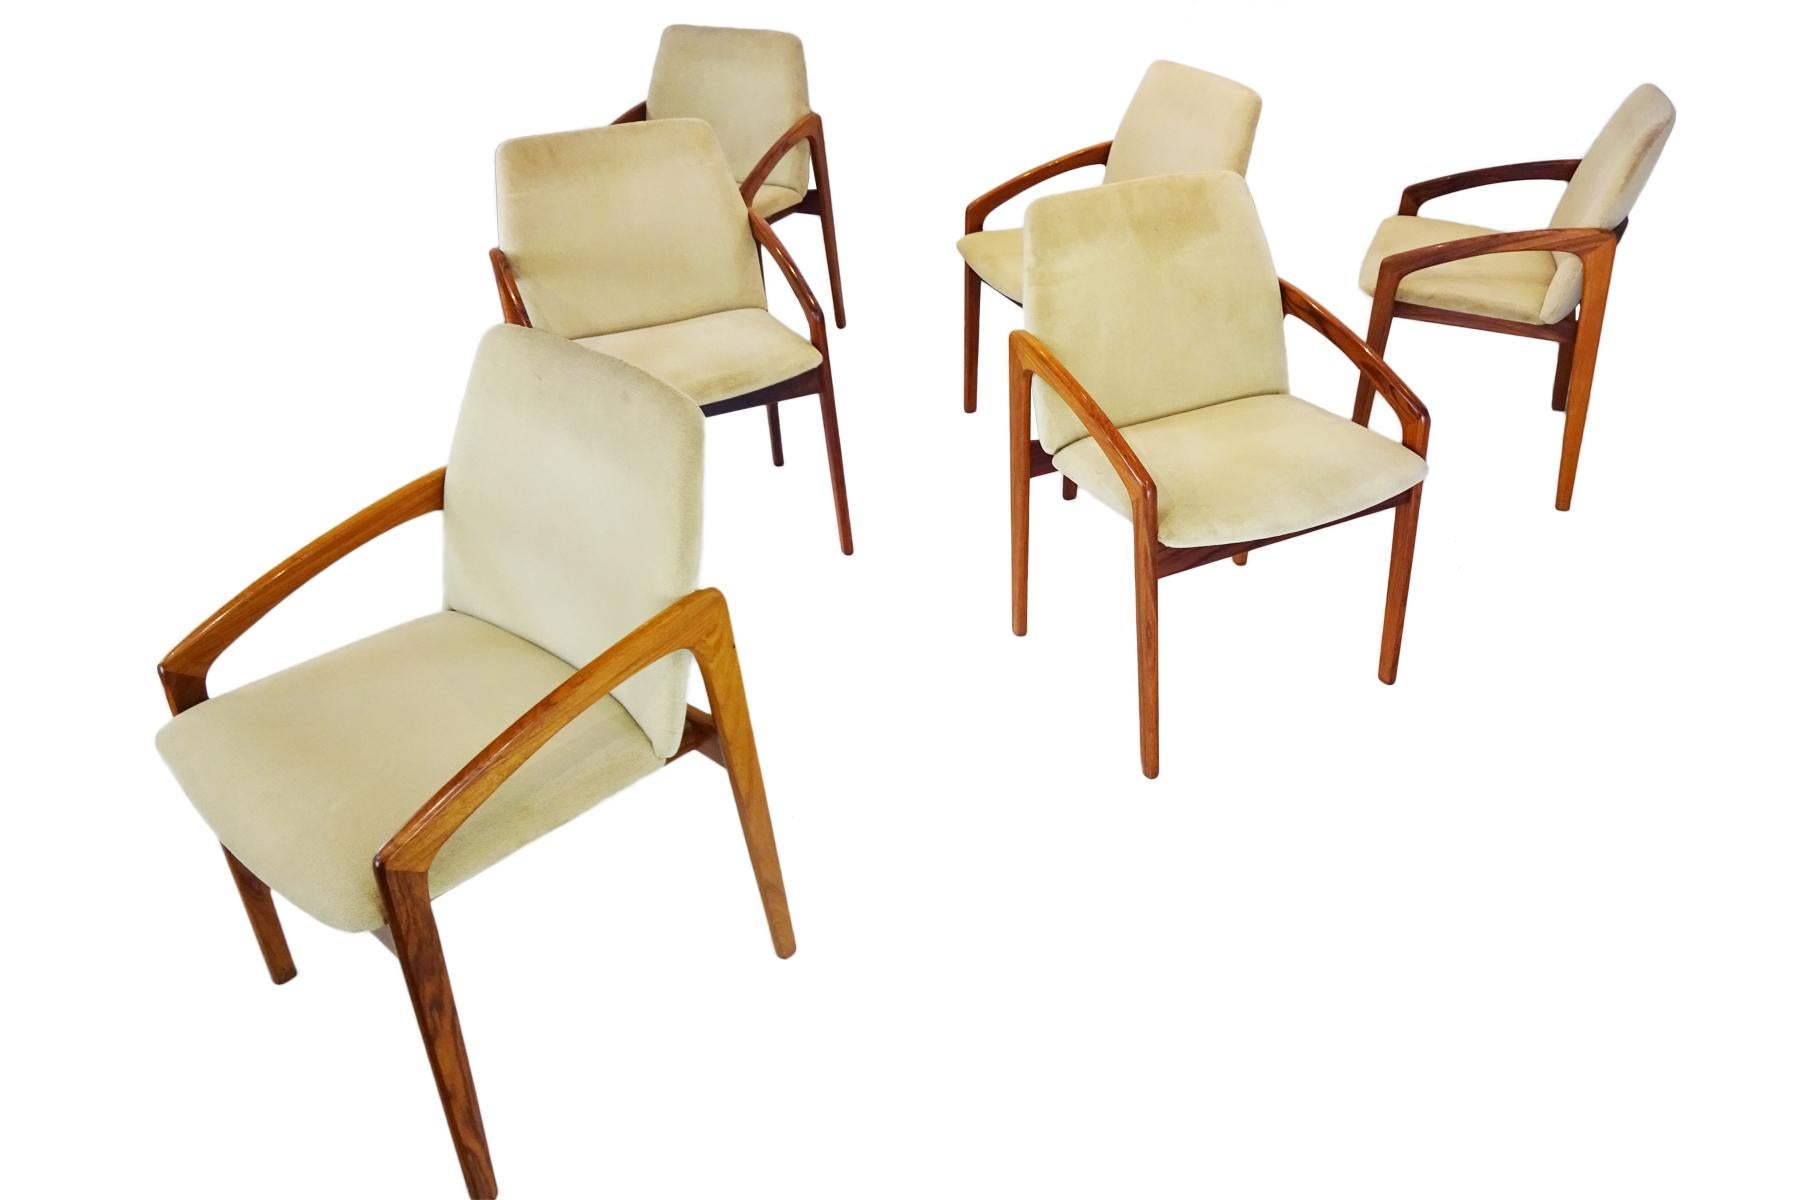 A set of 6 Danish midcentury carver dining chairs by Kai Kristiansen for Korup Stole.

Born in 1929 Kristiansen is often lauded as one of iconic Danish midcentury designers. Like many of the great Danish designers of the time he apprenticed in